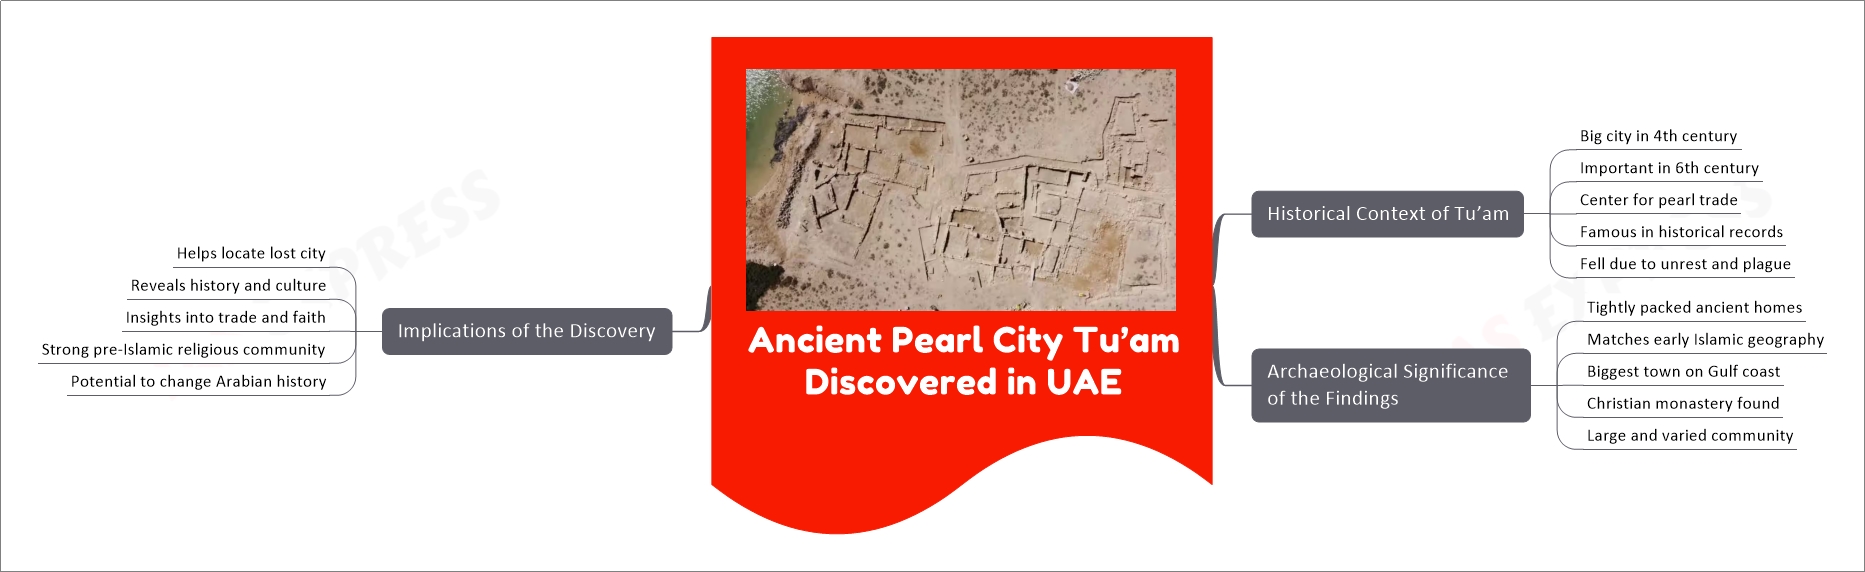 Ancient Pearl City Tu’am Discovered in UAE | UPSC